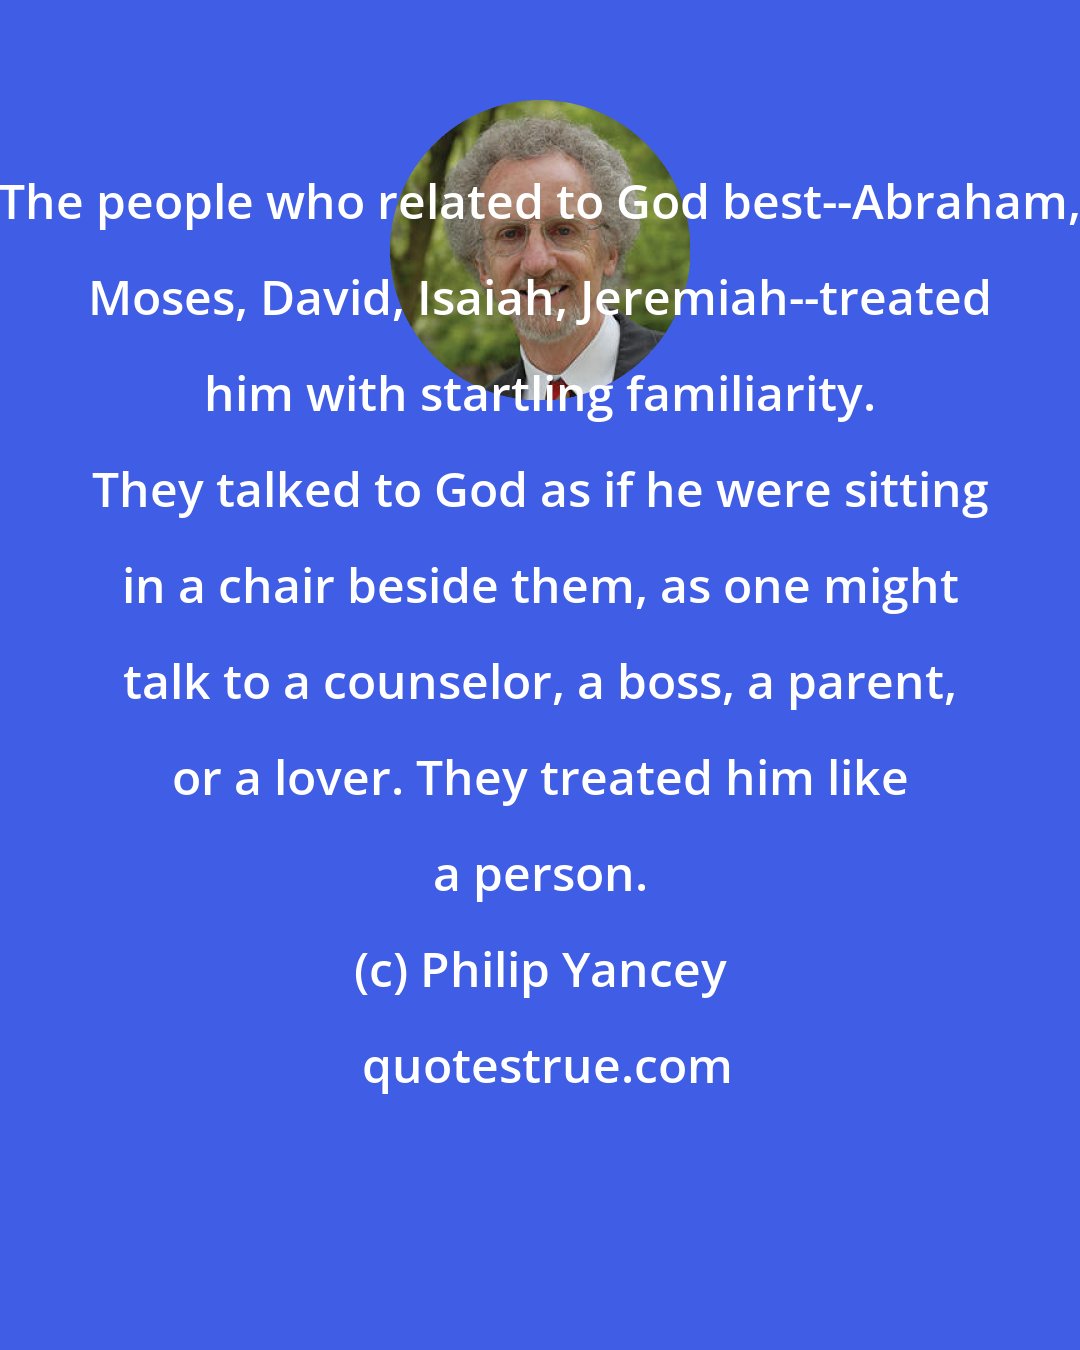 Philip Yancey: The people who related to God best--Abraham, Moses, David, Isaiah, Jeremiah--treated him with startling familiarity. They talked to God as if he were sitting in a chair beside them, as one might talk to a counselor, a boss, a parent, or a lover. They treated him like a person.